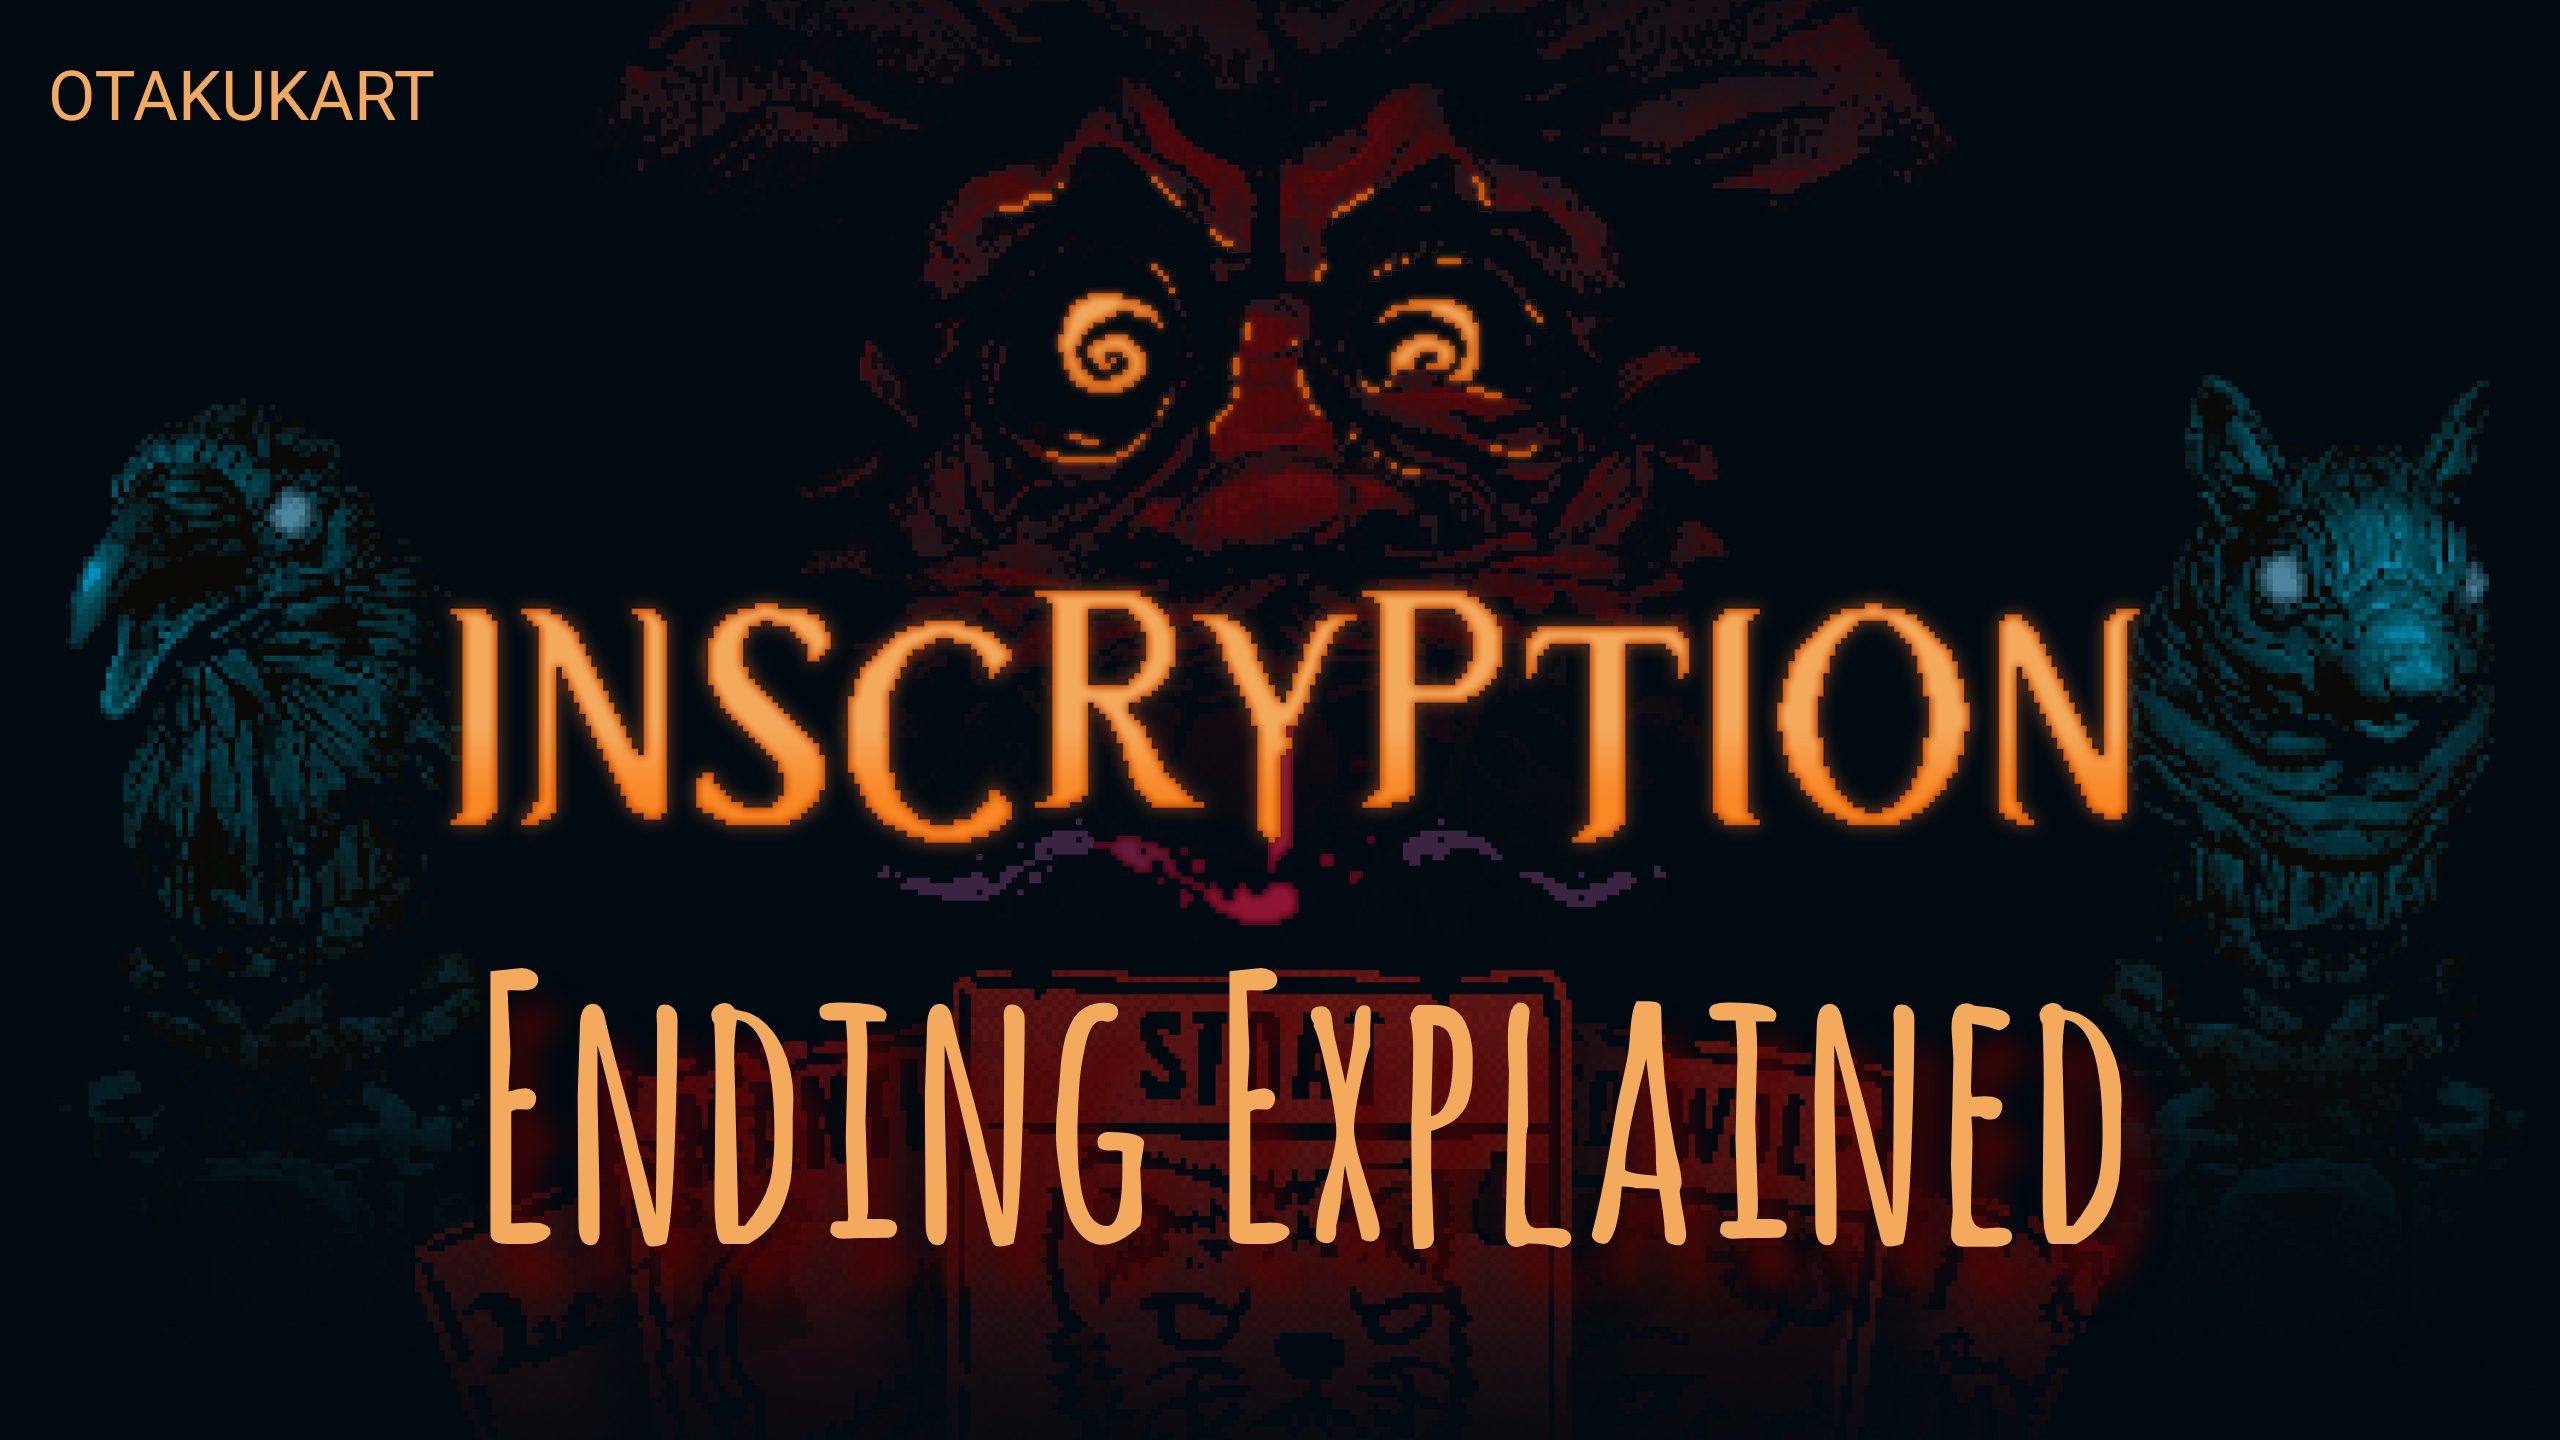 Inscryption Ending Explained